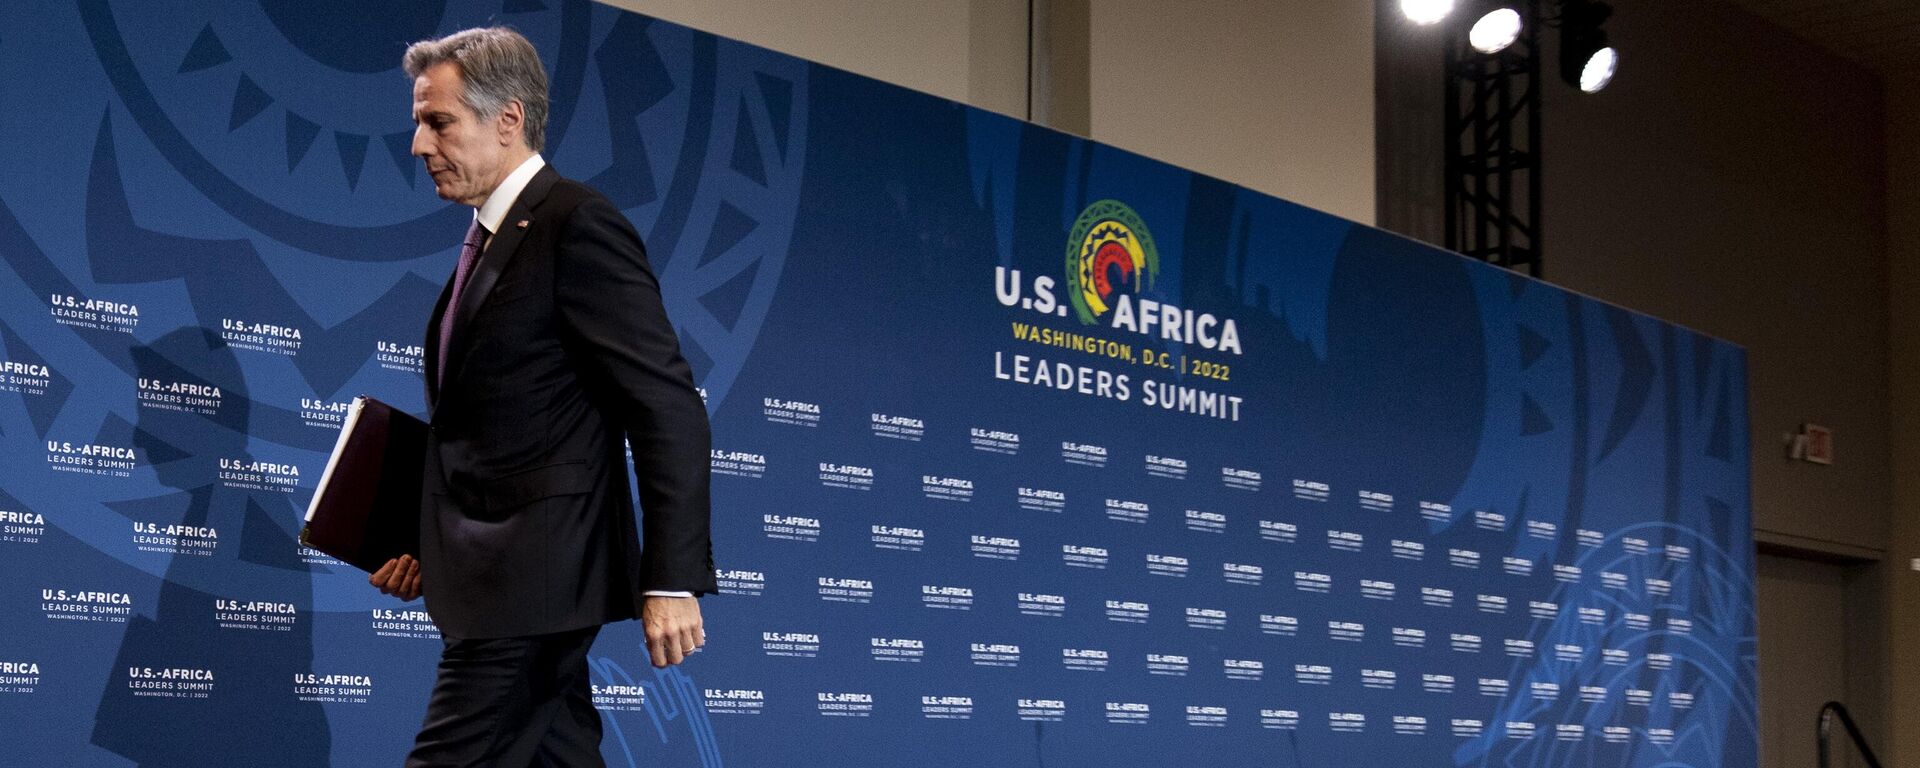 Secretary of State Antony Blinken departs a news conference at a U.S. Africa Leaders Summit at the Walter E. Washington Convention Center in Washington, Thursday, Dec. 15, 2022.  - Sputnik Africa, 1920, 25.07.2023